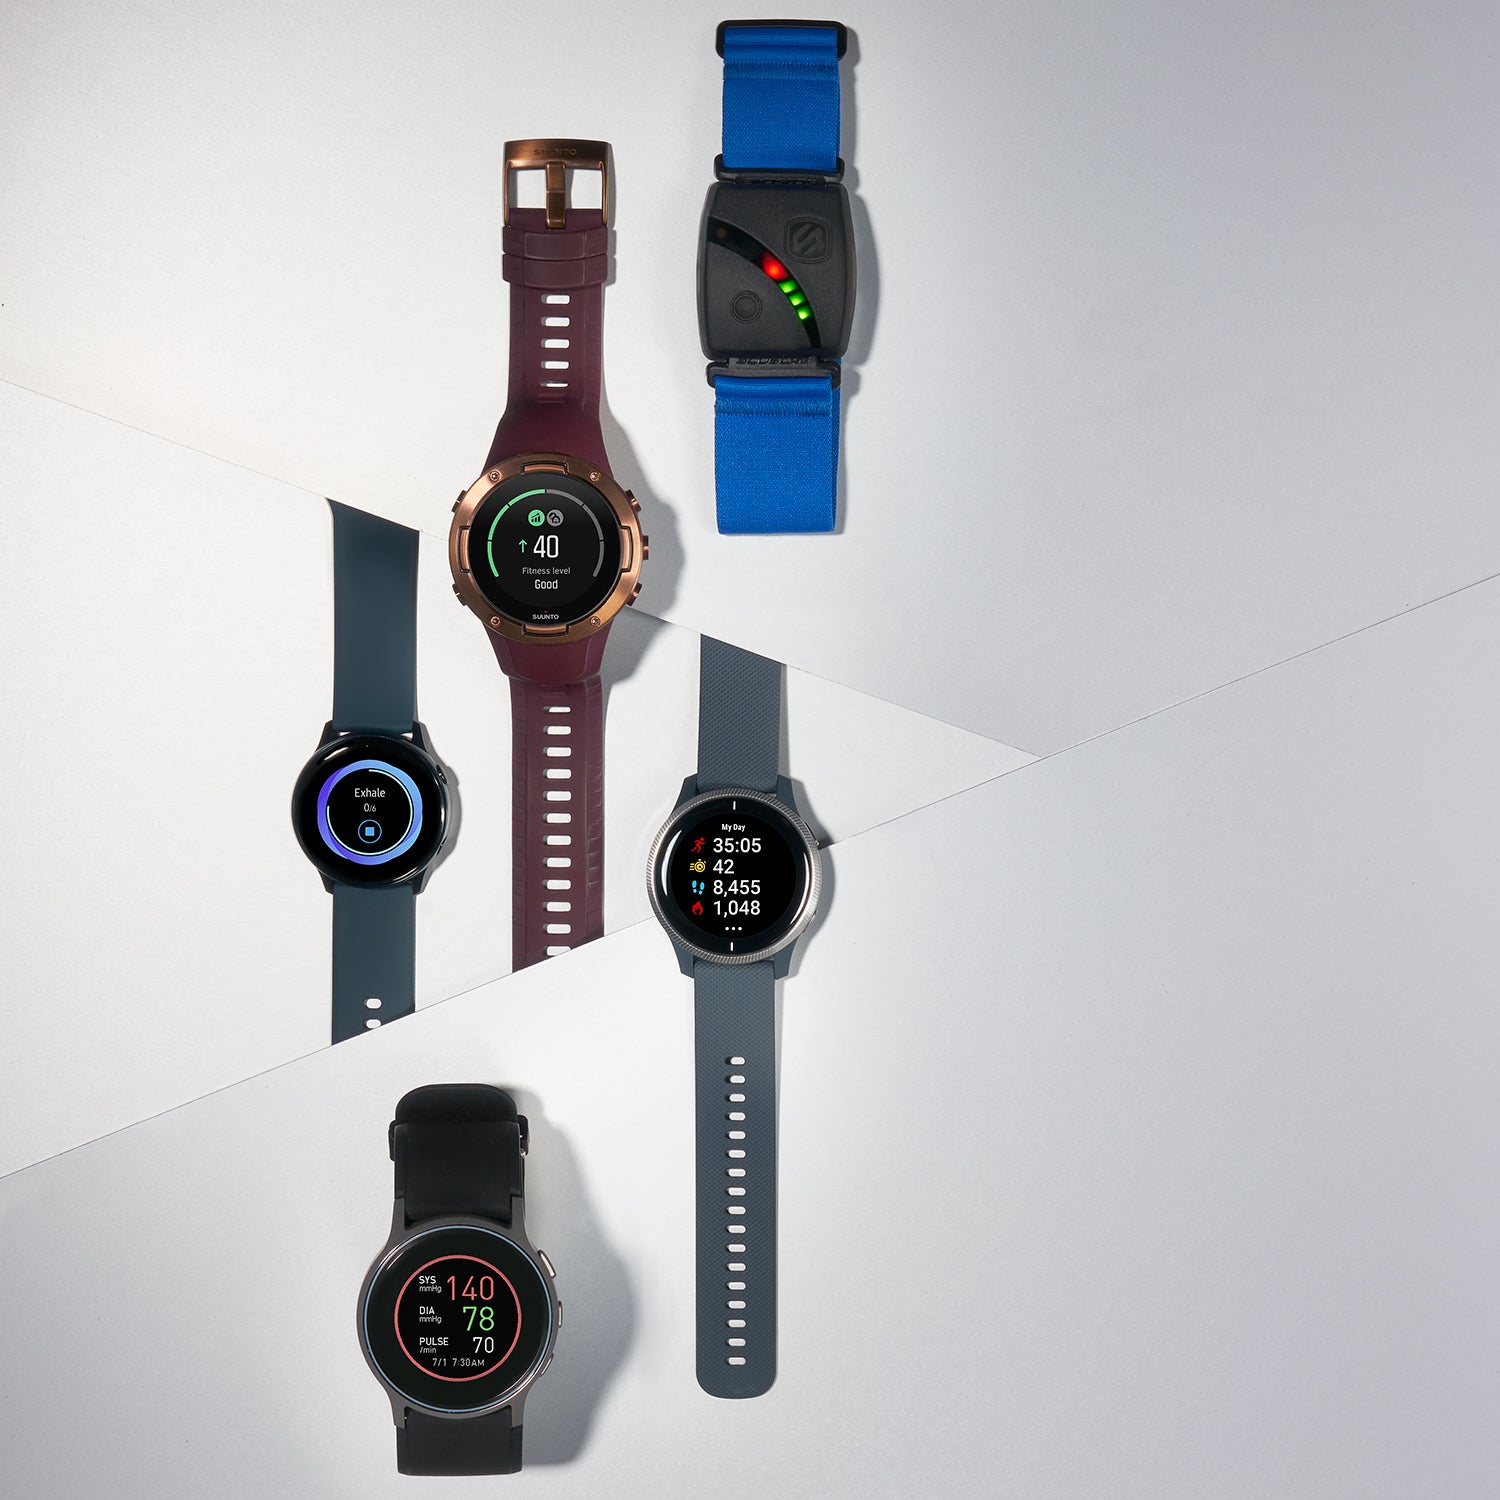 All Wearables & Smart Watches, Wearables